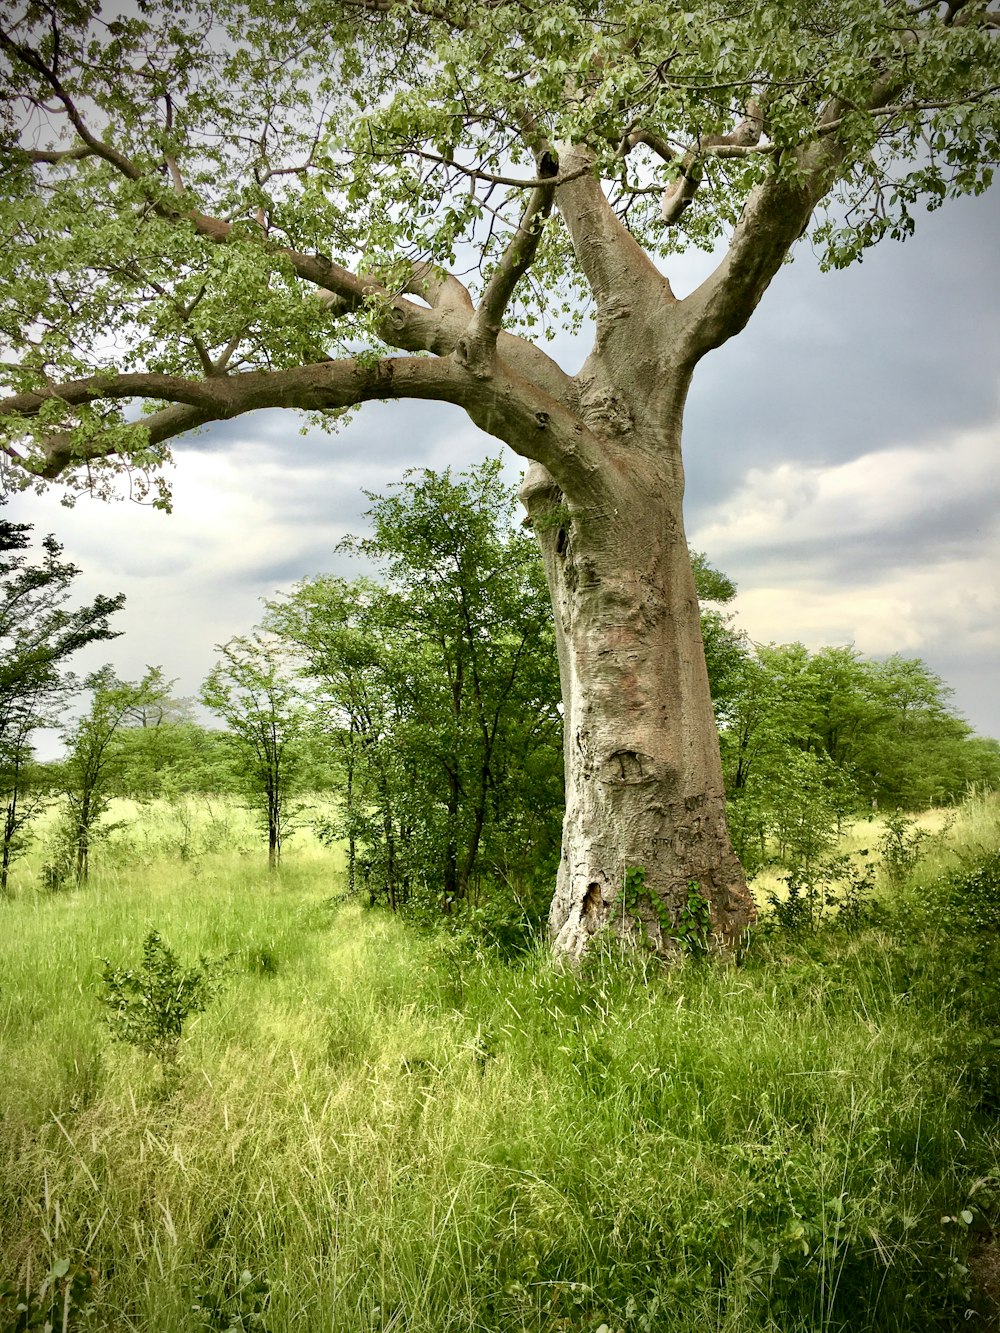 a tree in the middle of a grassy field